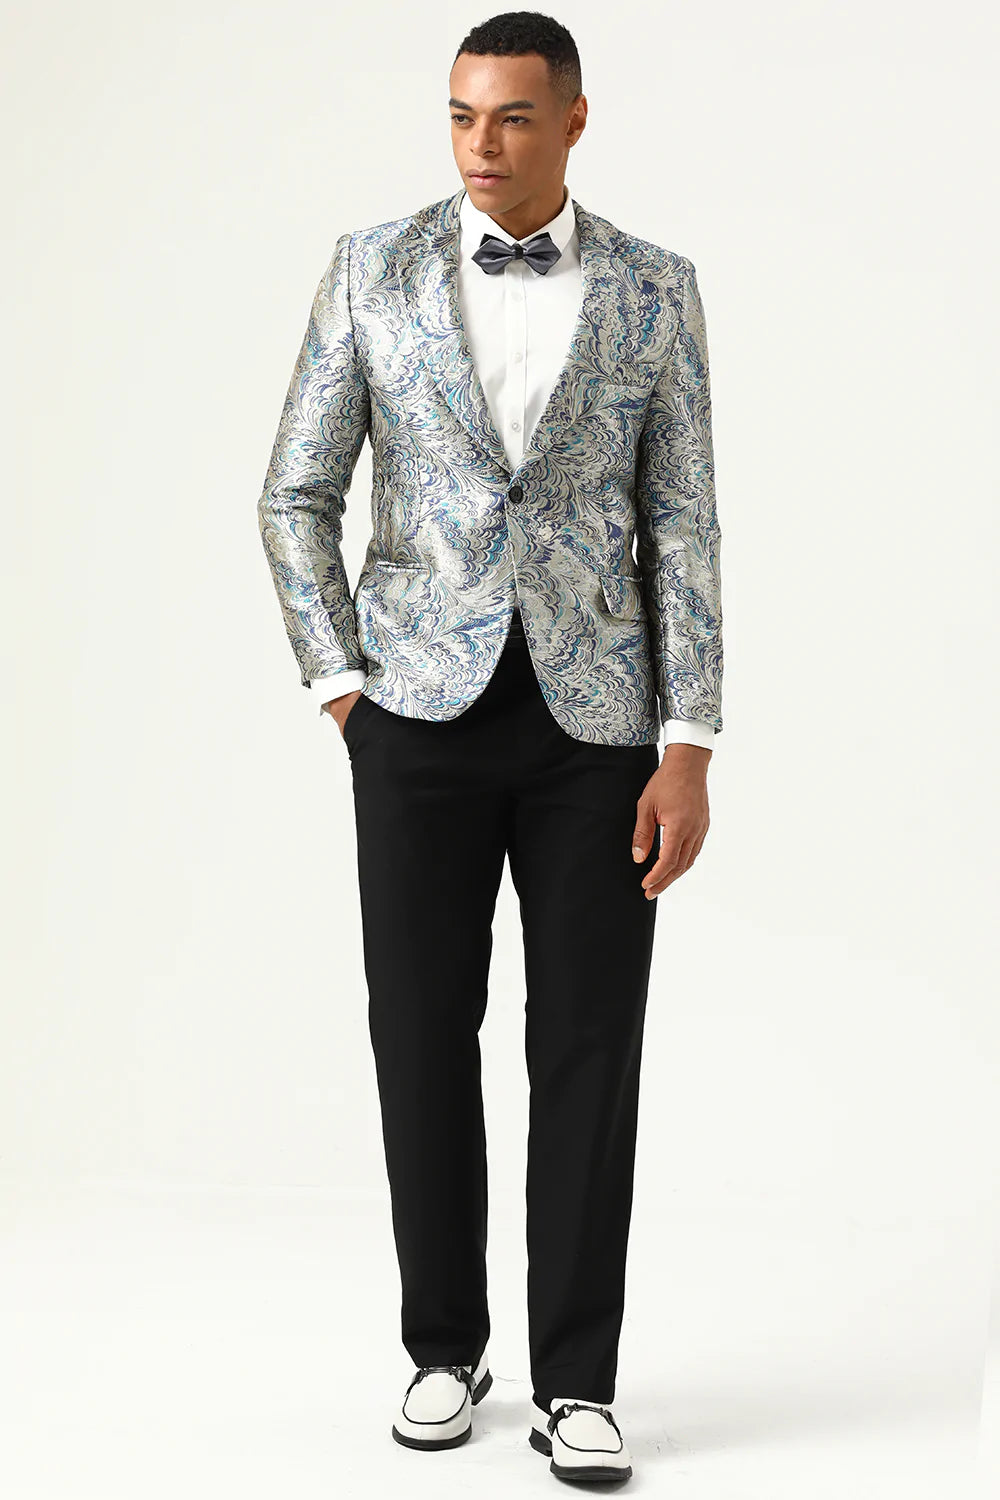 Silver and Blue Jacquard Notched Lapel Men's Formal Blazer